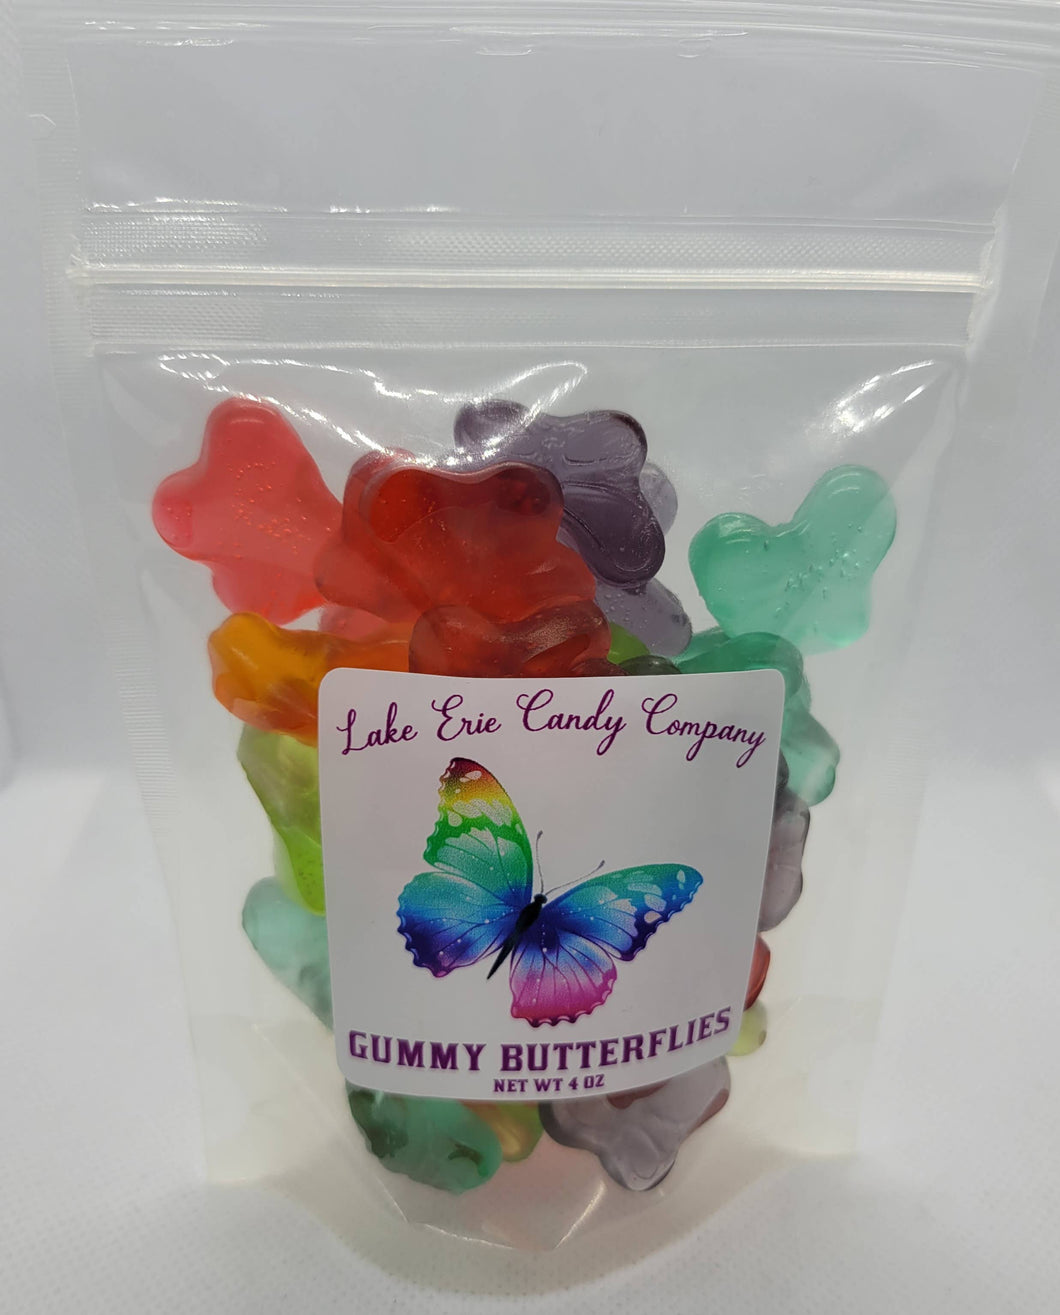 Lake Erie Candy Company - Gummy Butterflies